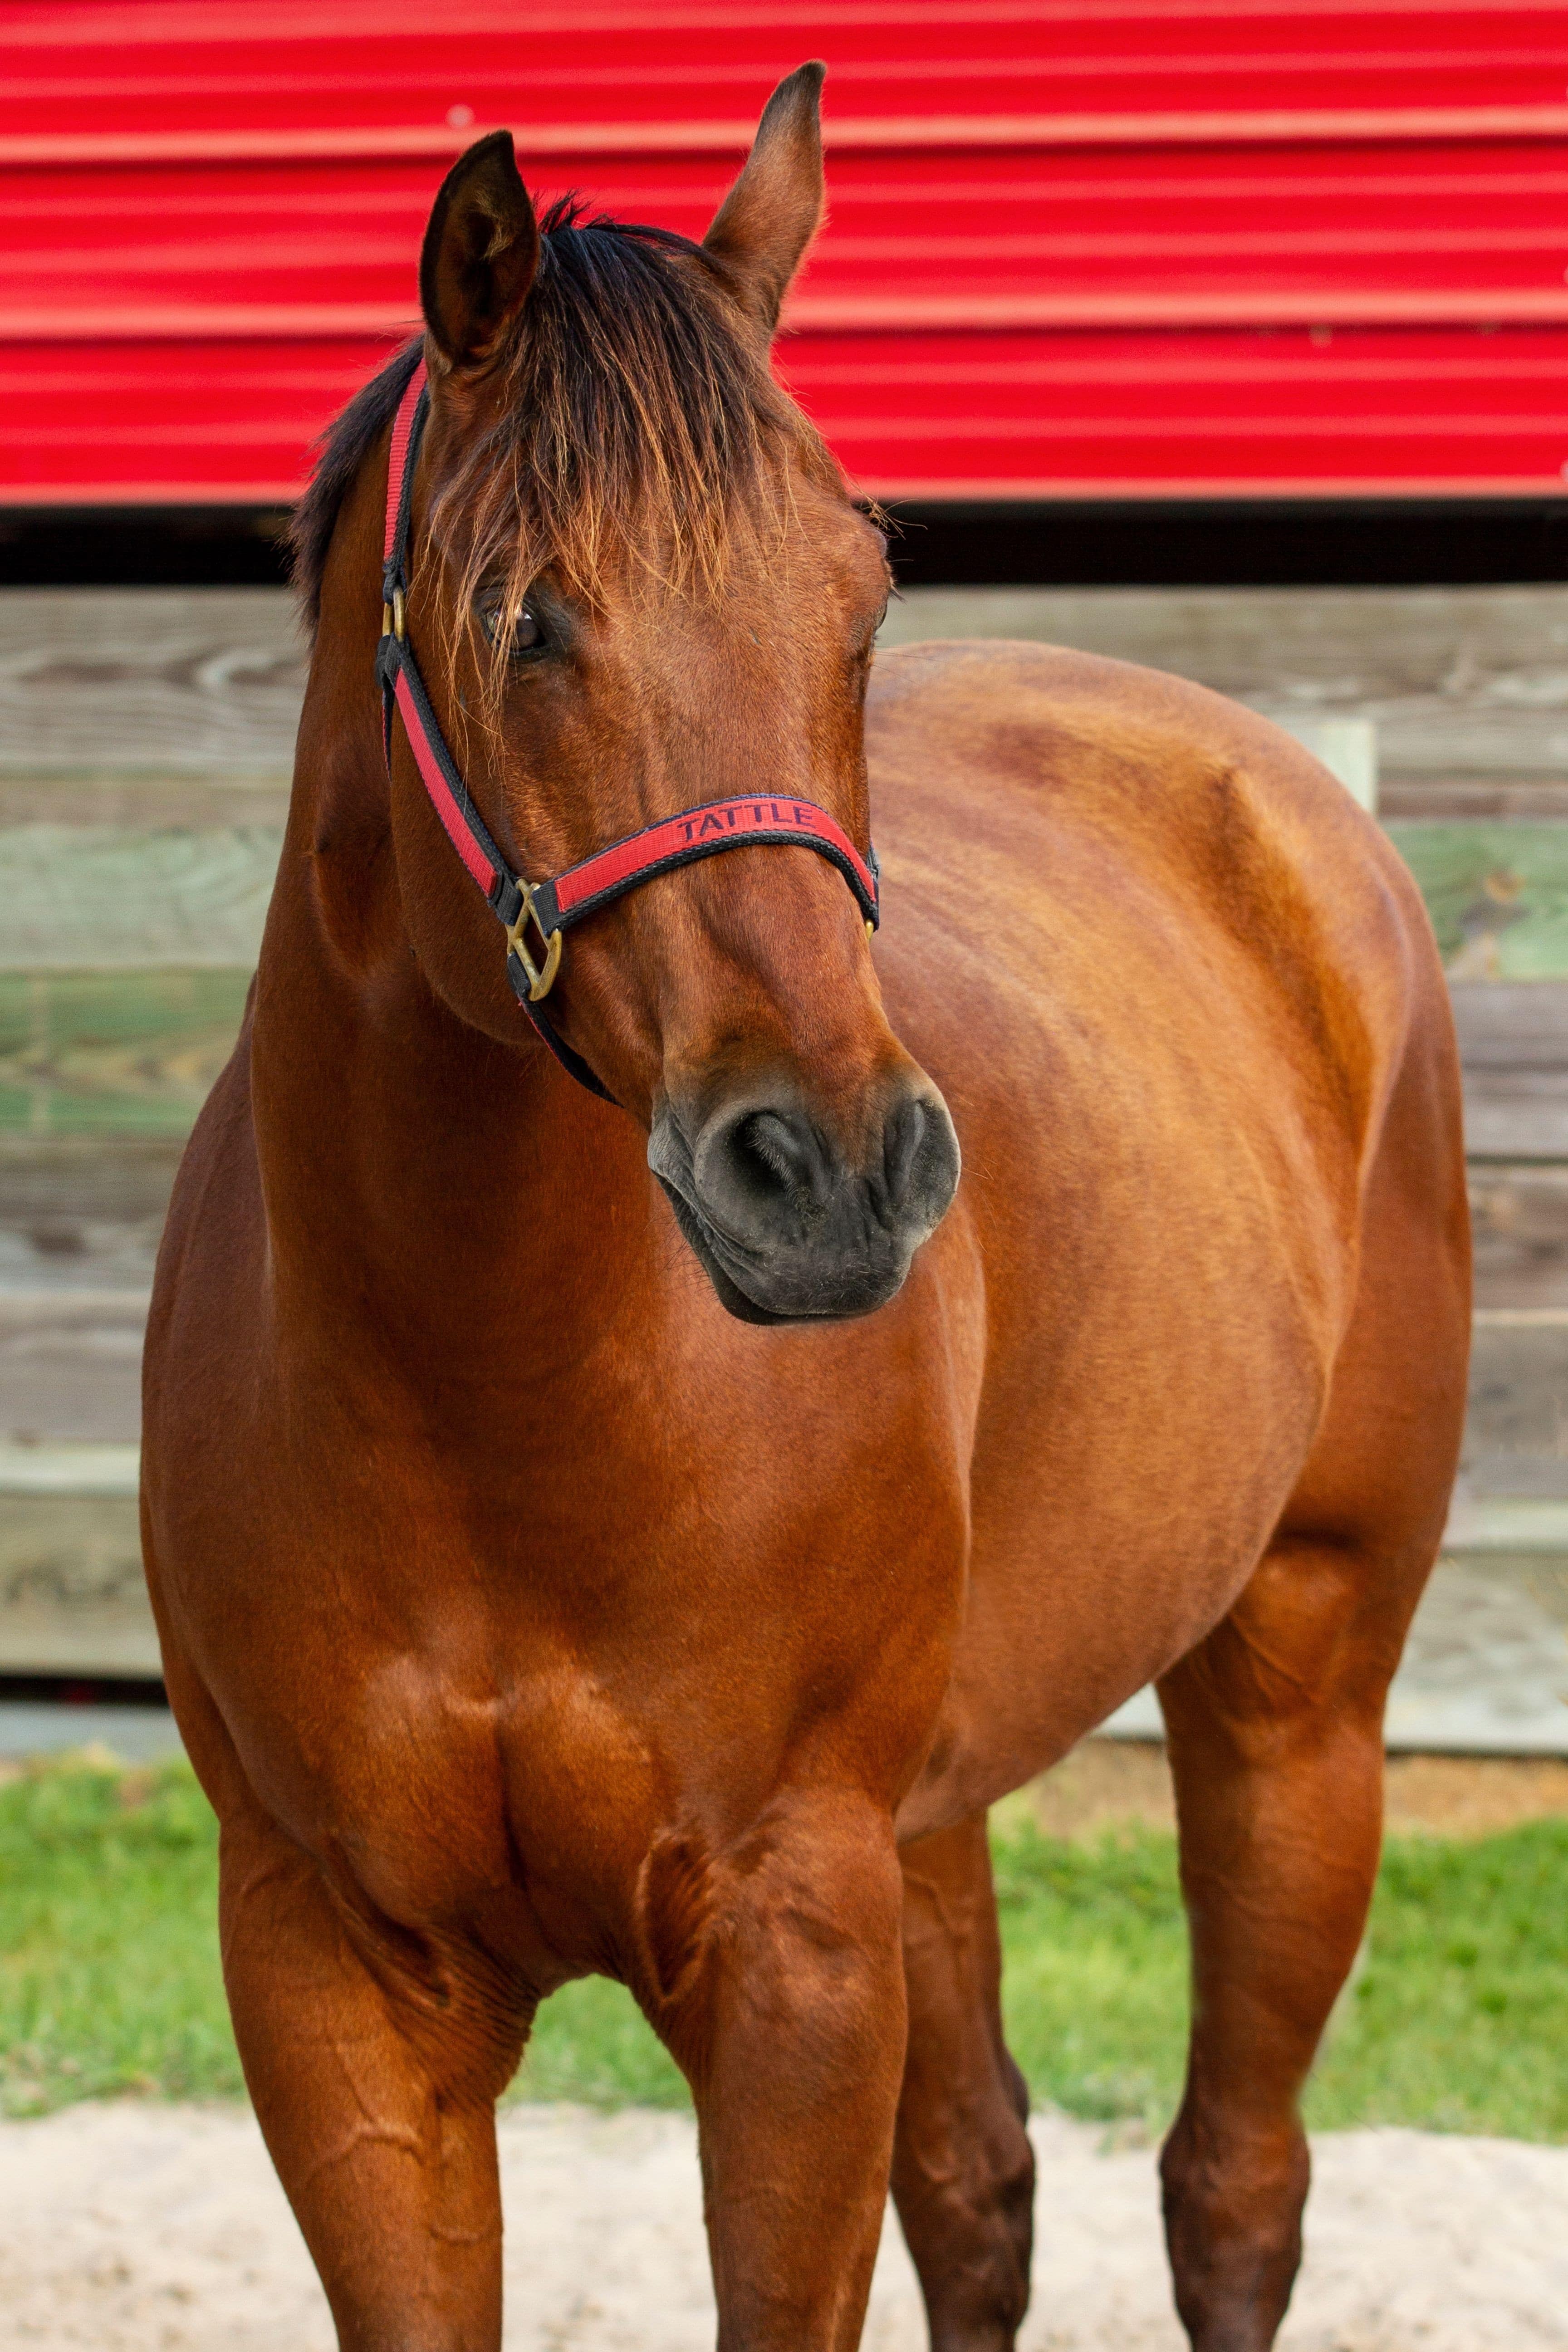 Tattle is a Western and English lesson horse at J & S Performance Horses. He is a bay gelding, wearing a red and black halter with his name on it.